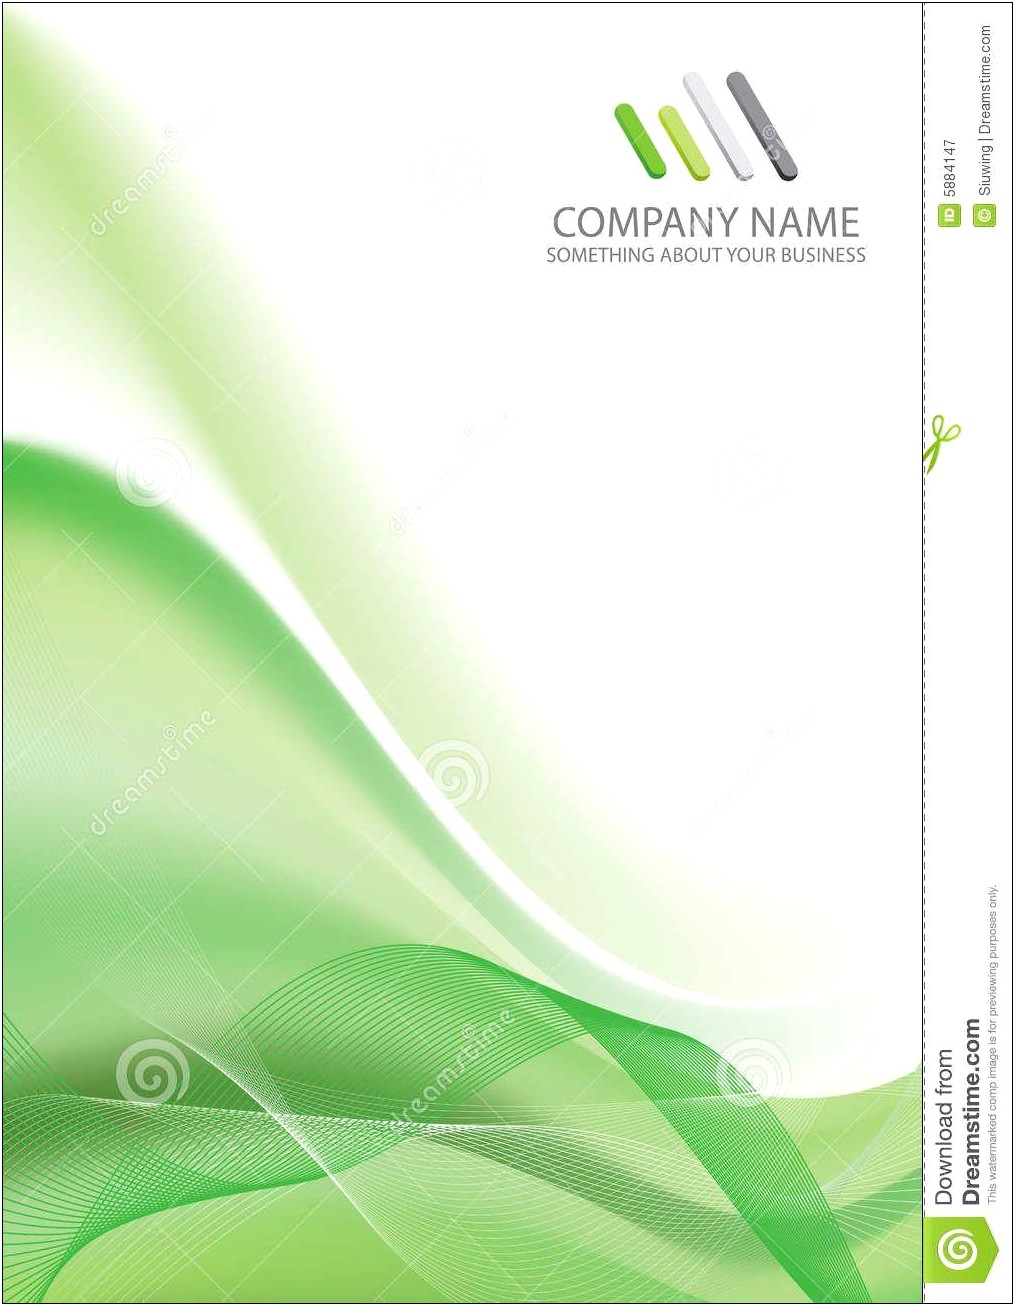 Microsoft Word Report Cover Page Templates Landscape